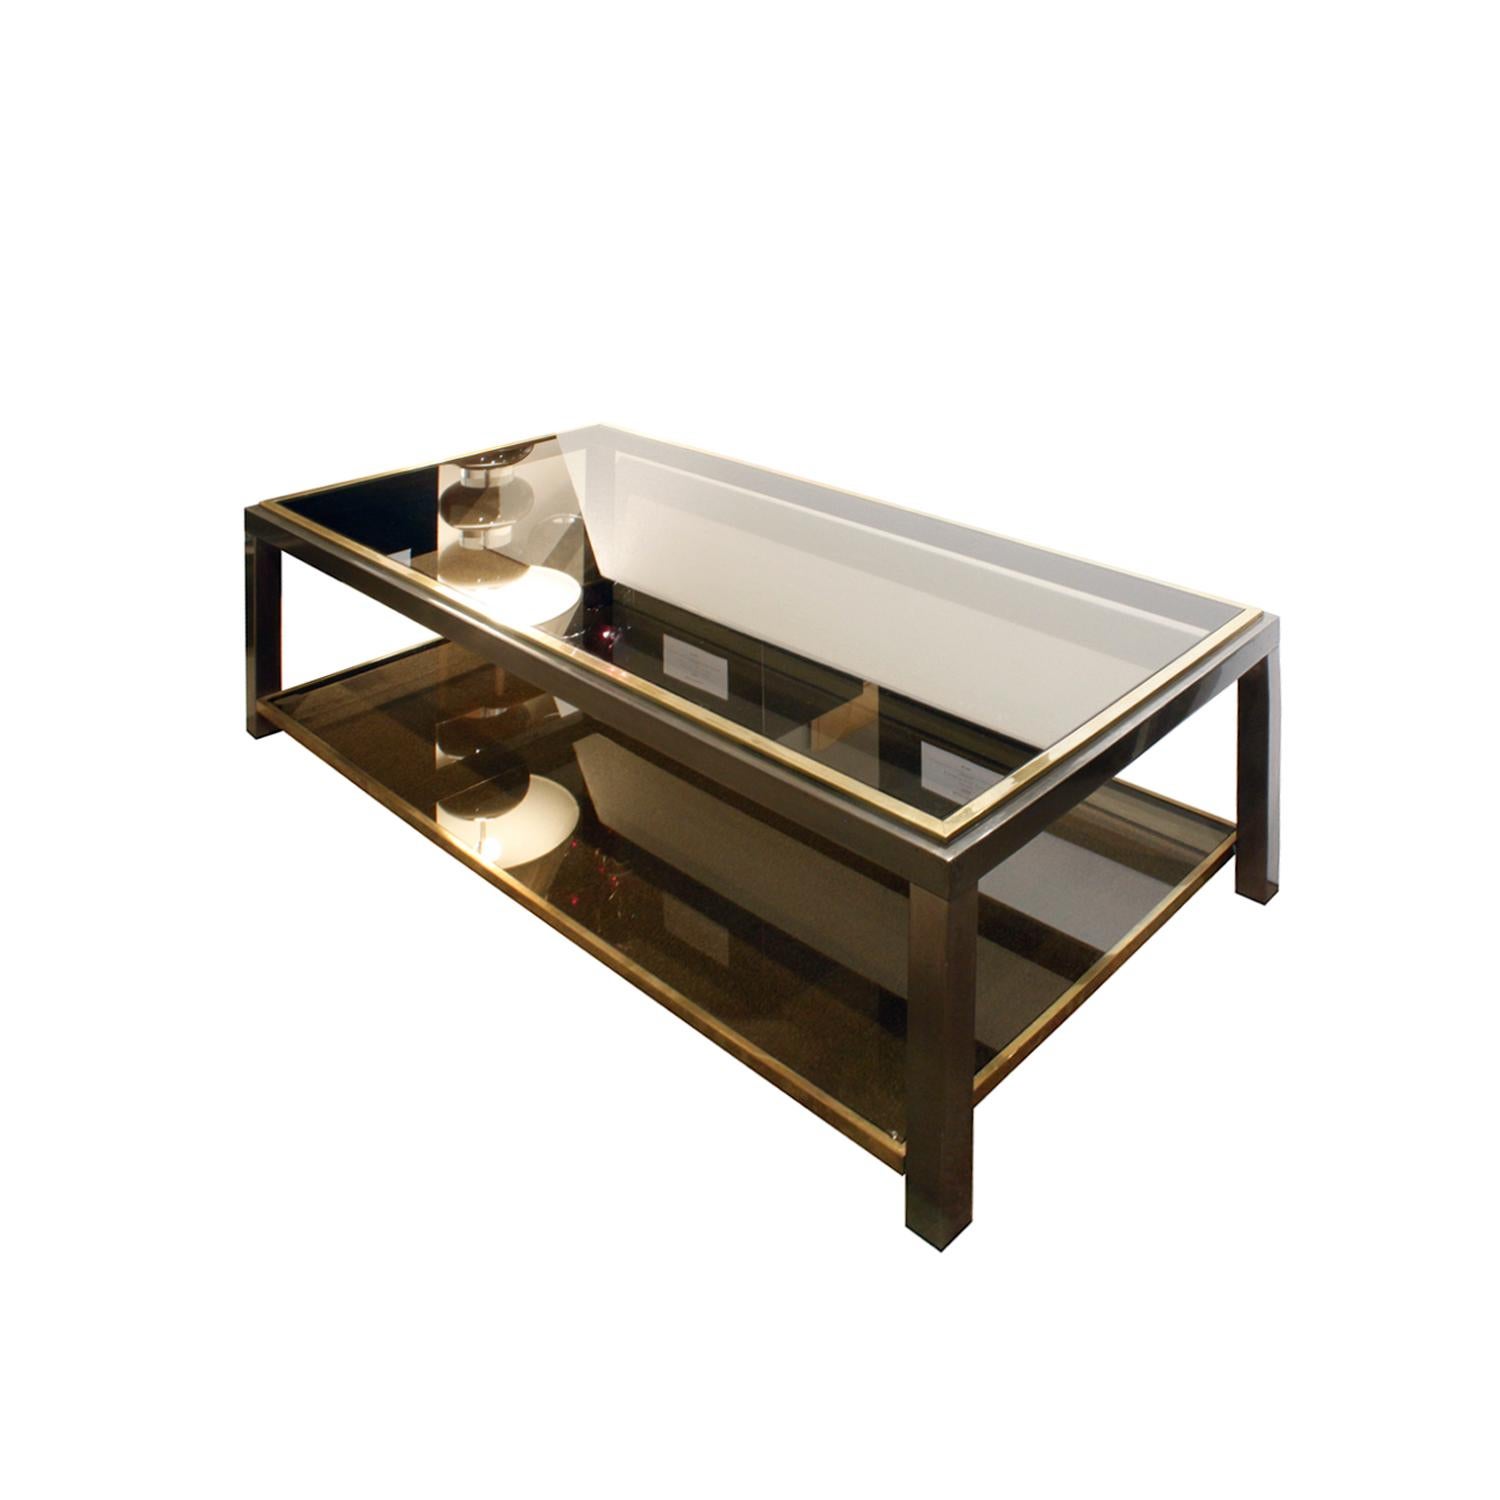 Mid-Century Modern Willy Rizzo 2-Tier Coffee Table in Gunmetal and Brass, 1960s